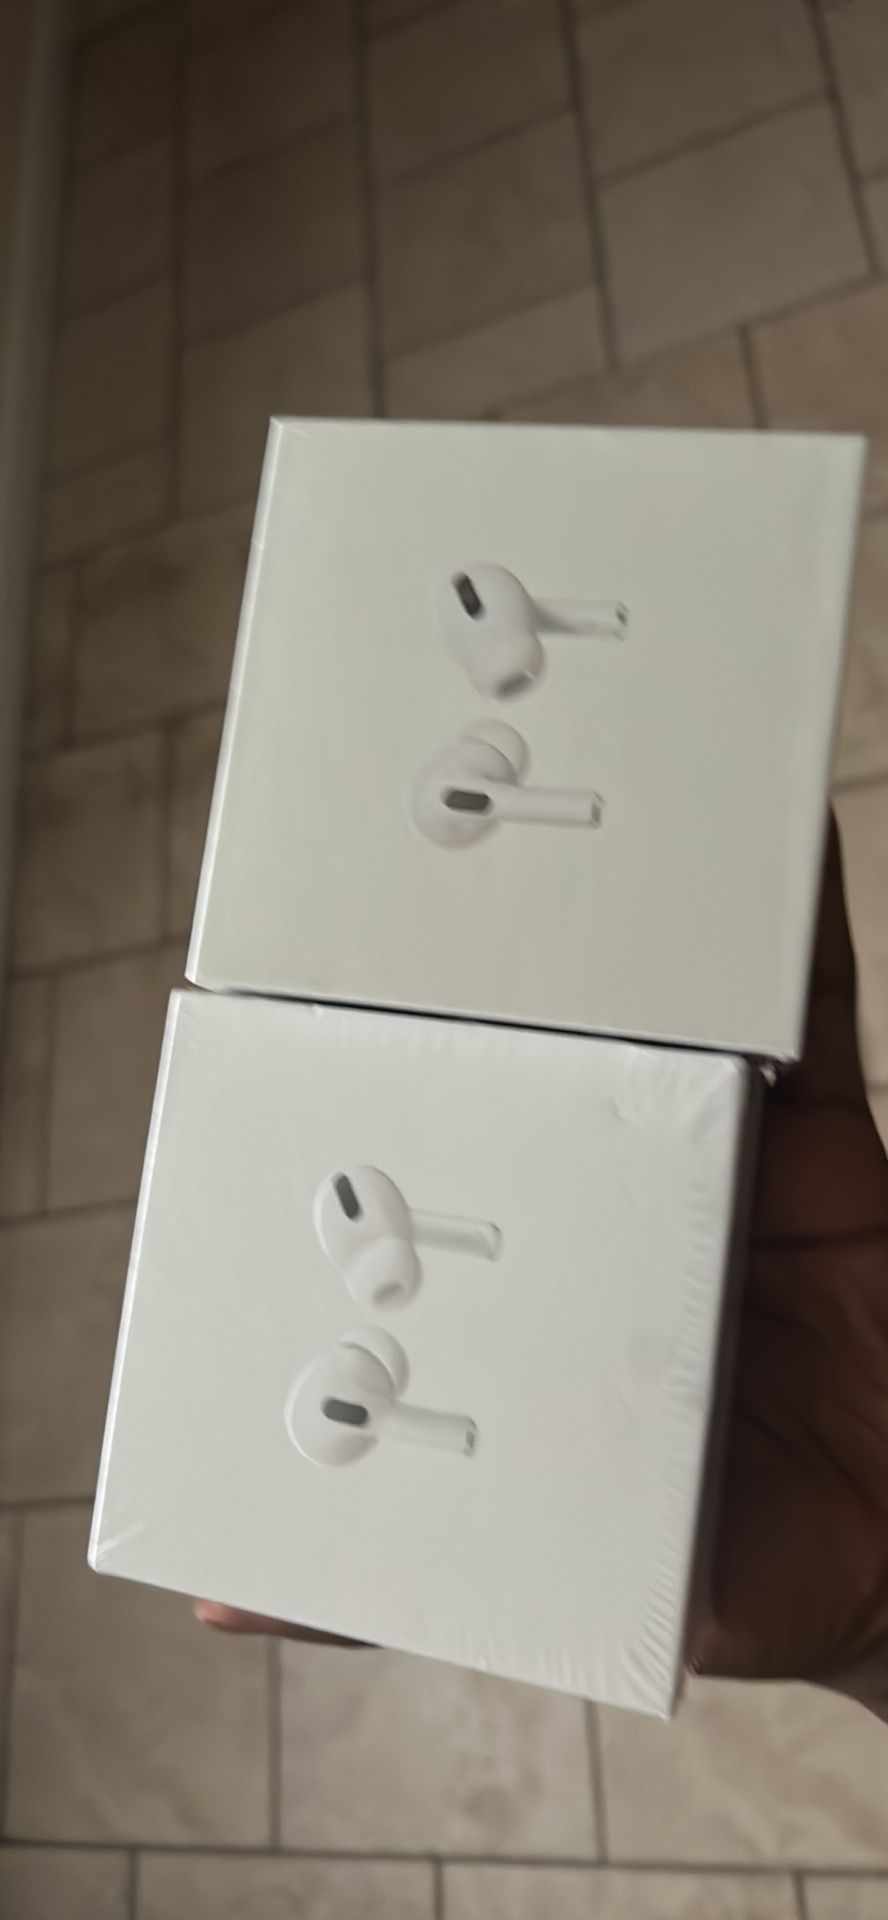 Airpod Pro’s ( 2for$150)